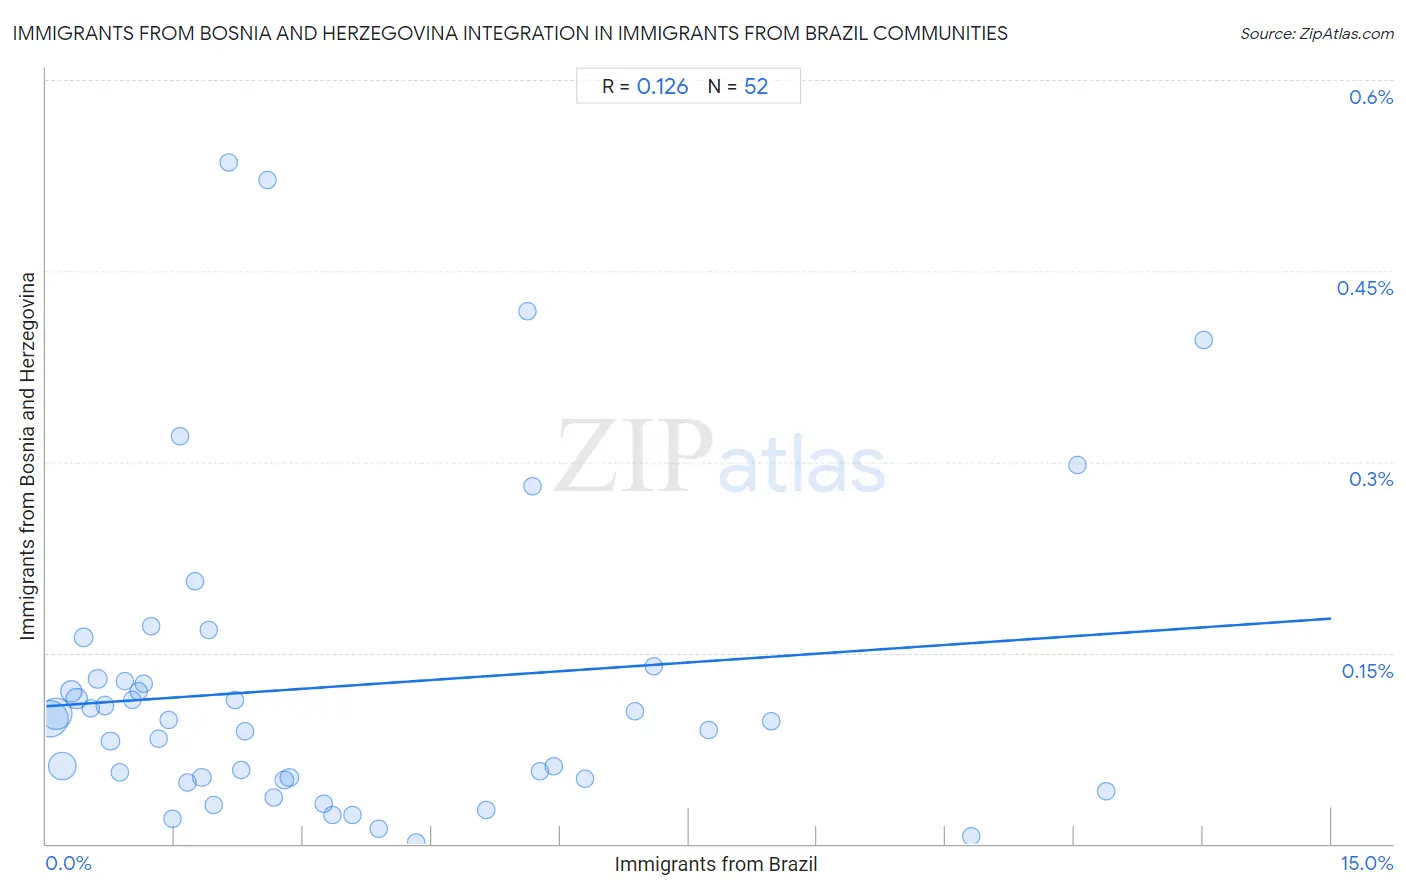 Immigrants from Brazil Integration in Immigrants from Bosnia and Herzegovina Communities